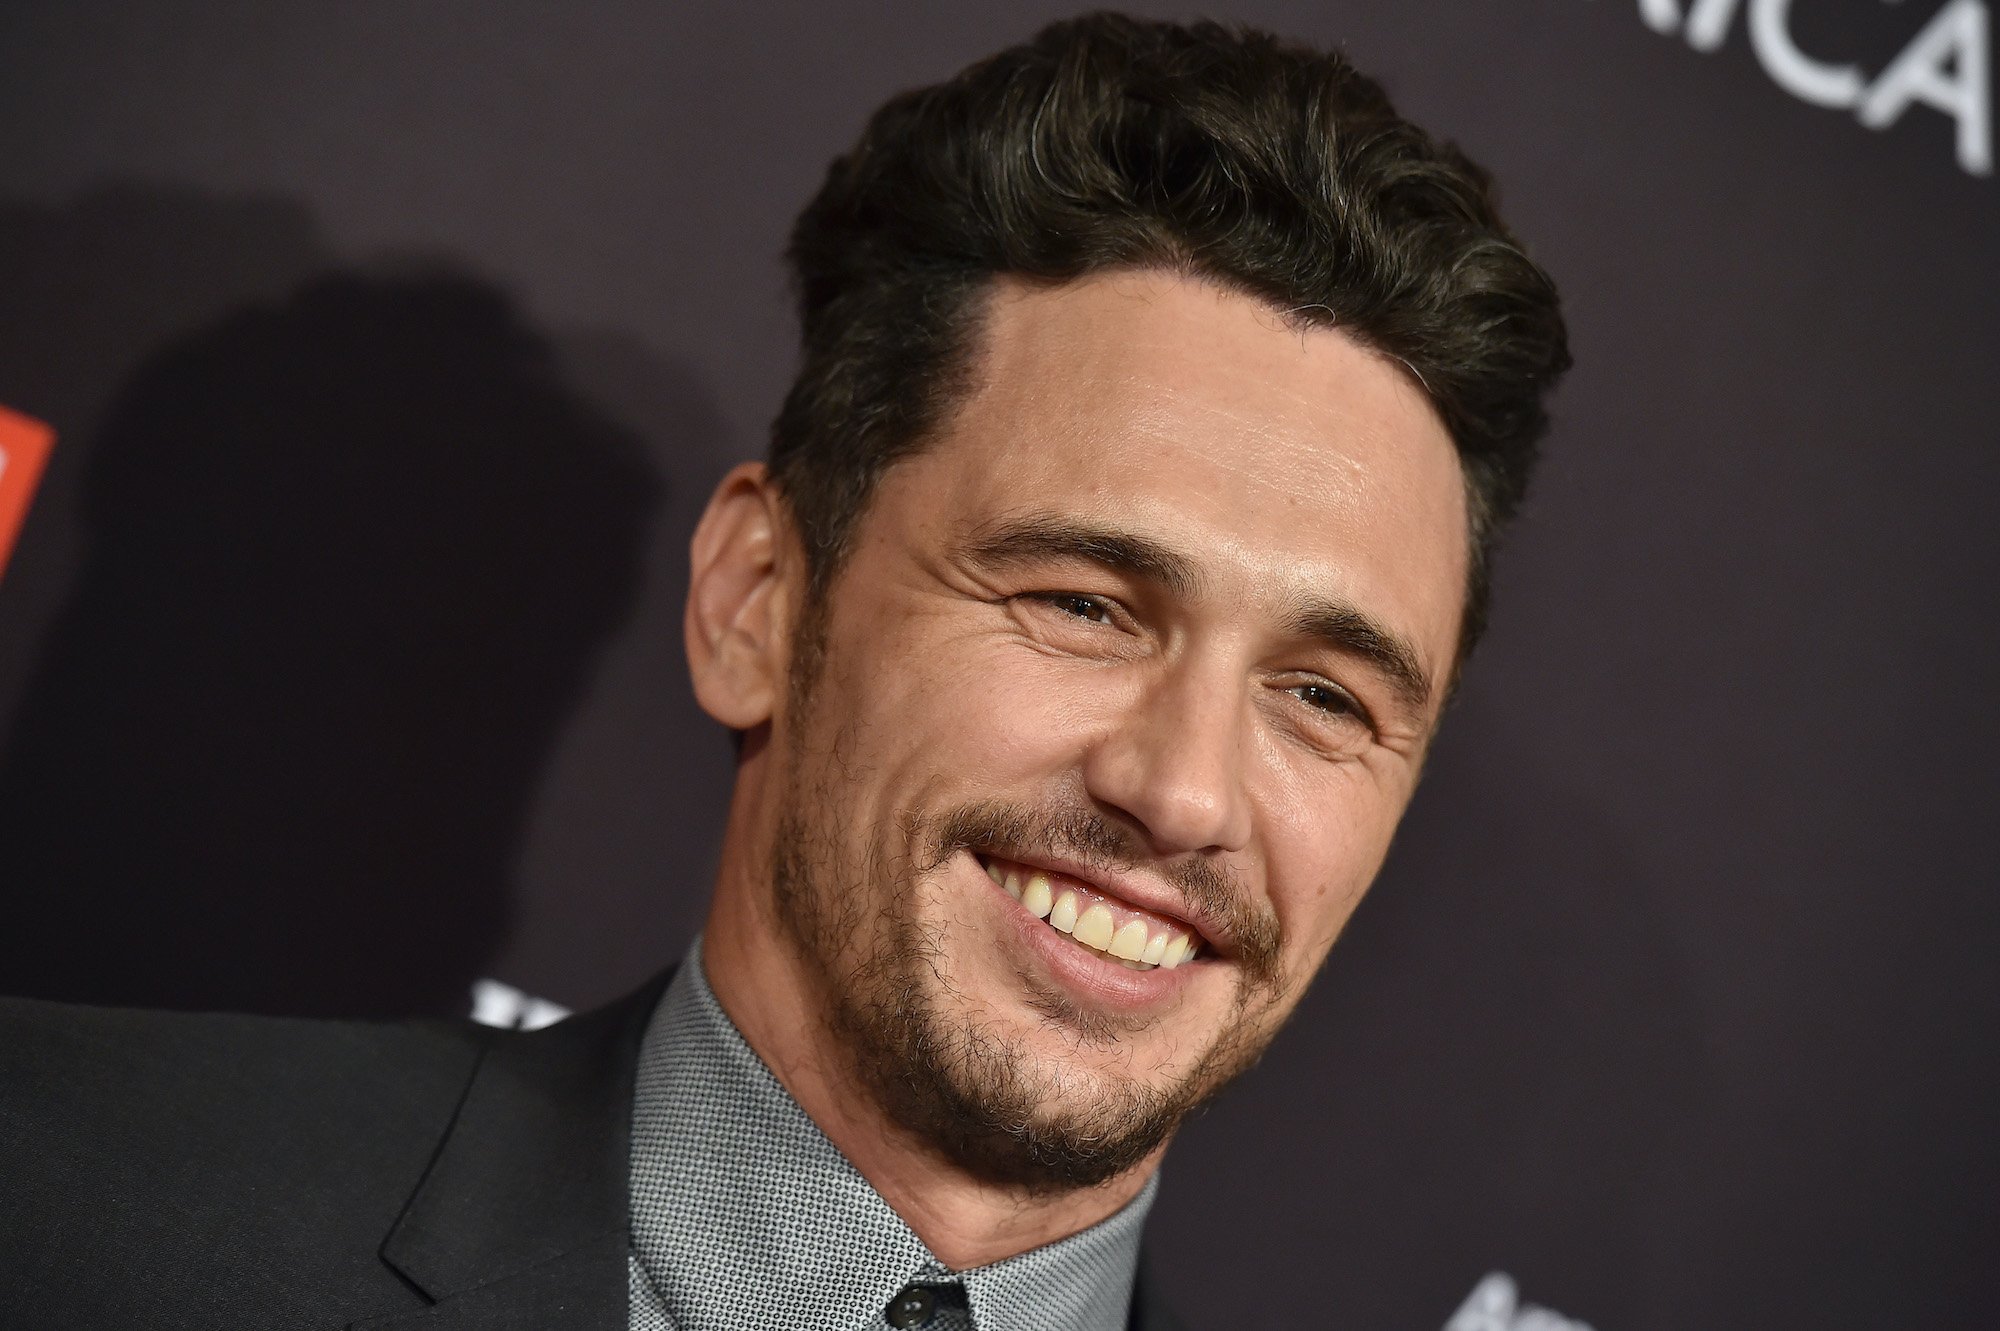 James Franco on the red carpet